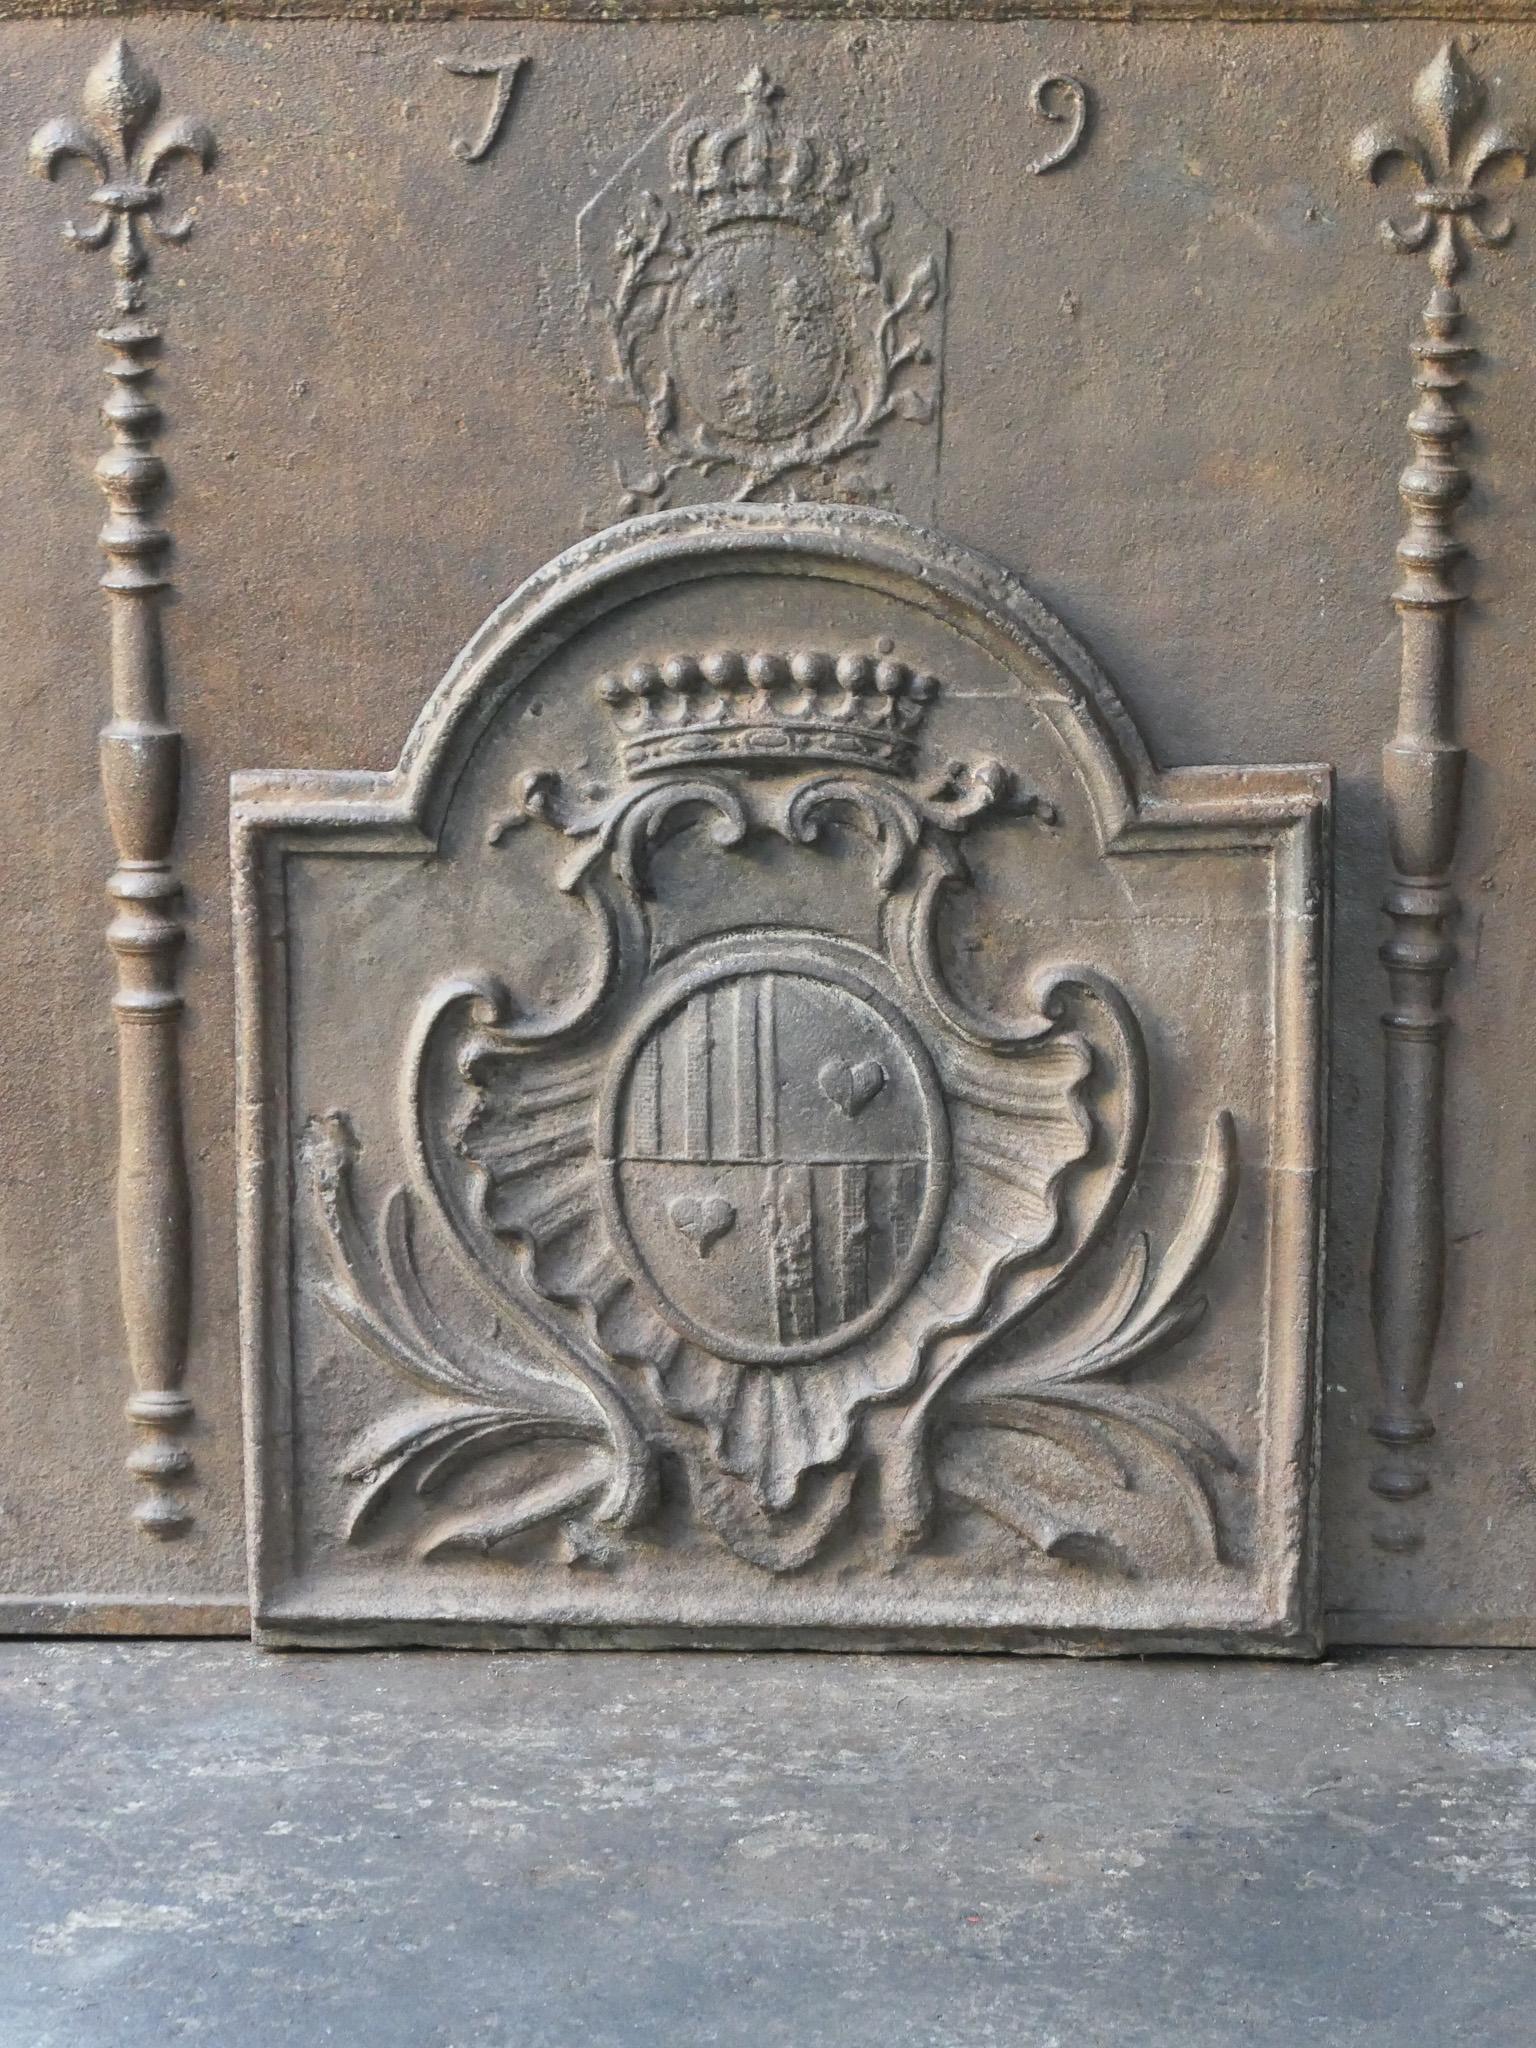 18th century French Louis XV period fireback with a coat of arms.

The fireback is made of cast iron and has a natural brown patina. Upon request it can be made black / pewter colored at no extra cost. The condition of the fireback is good, no